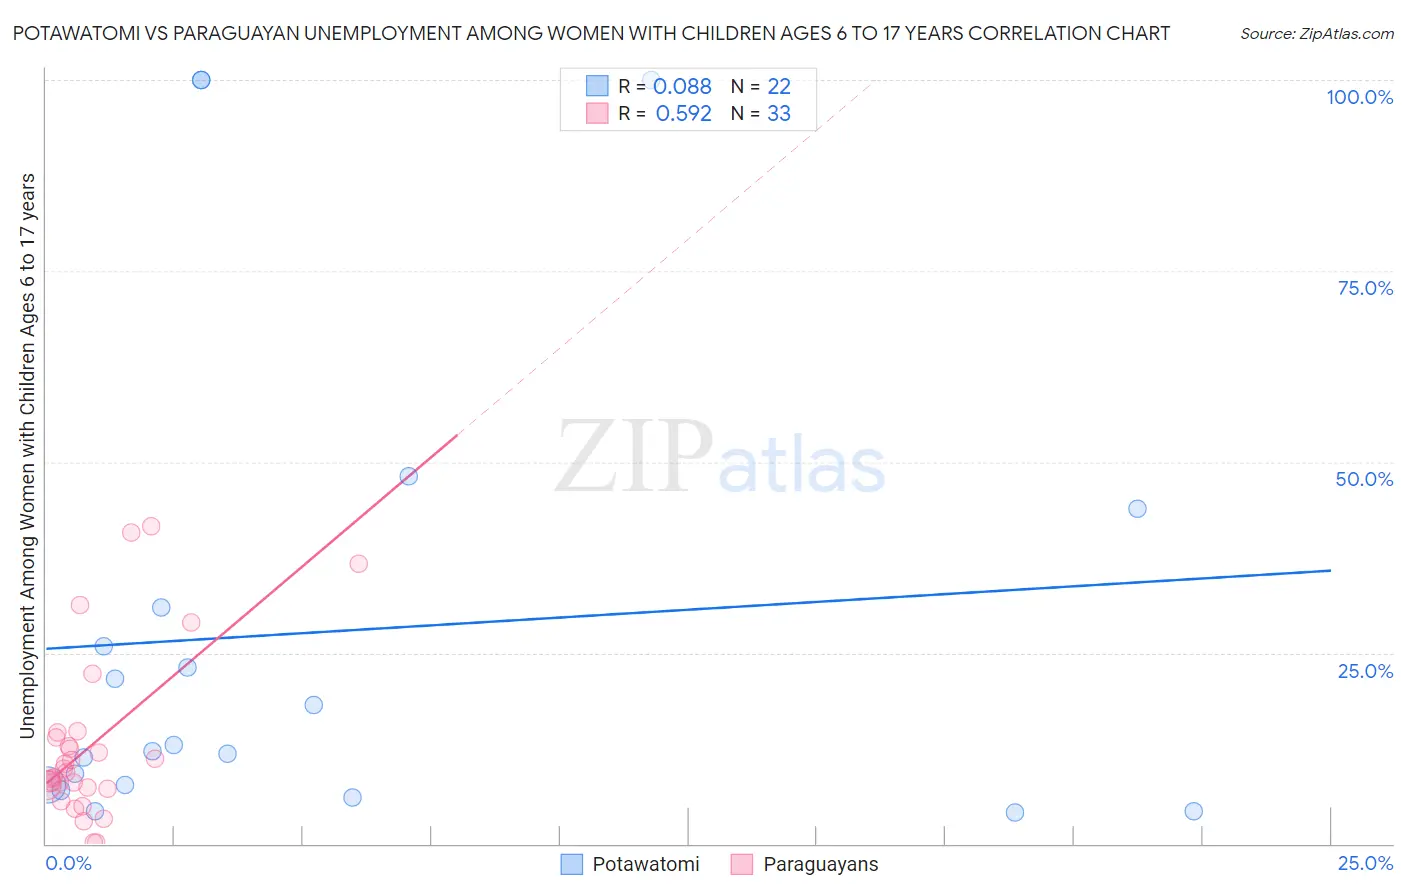 Potawatomi vs Paraguayan Unemployment Among Women with Children Ages 6 to 17 years